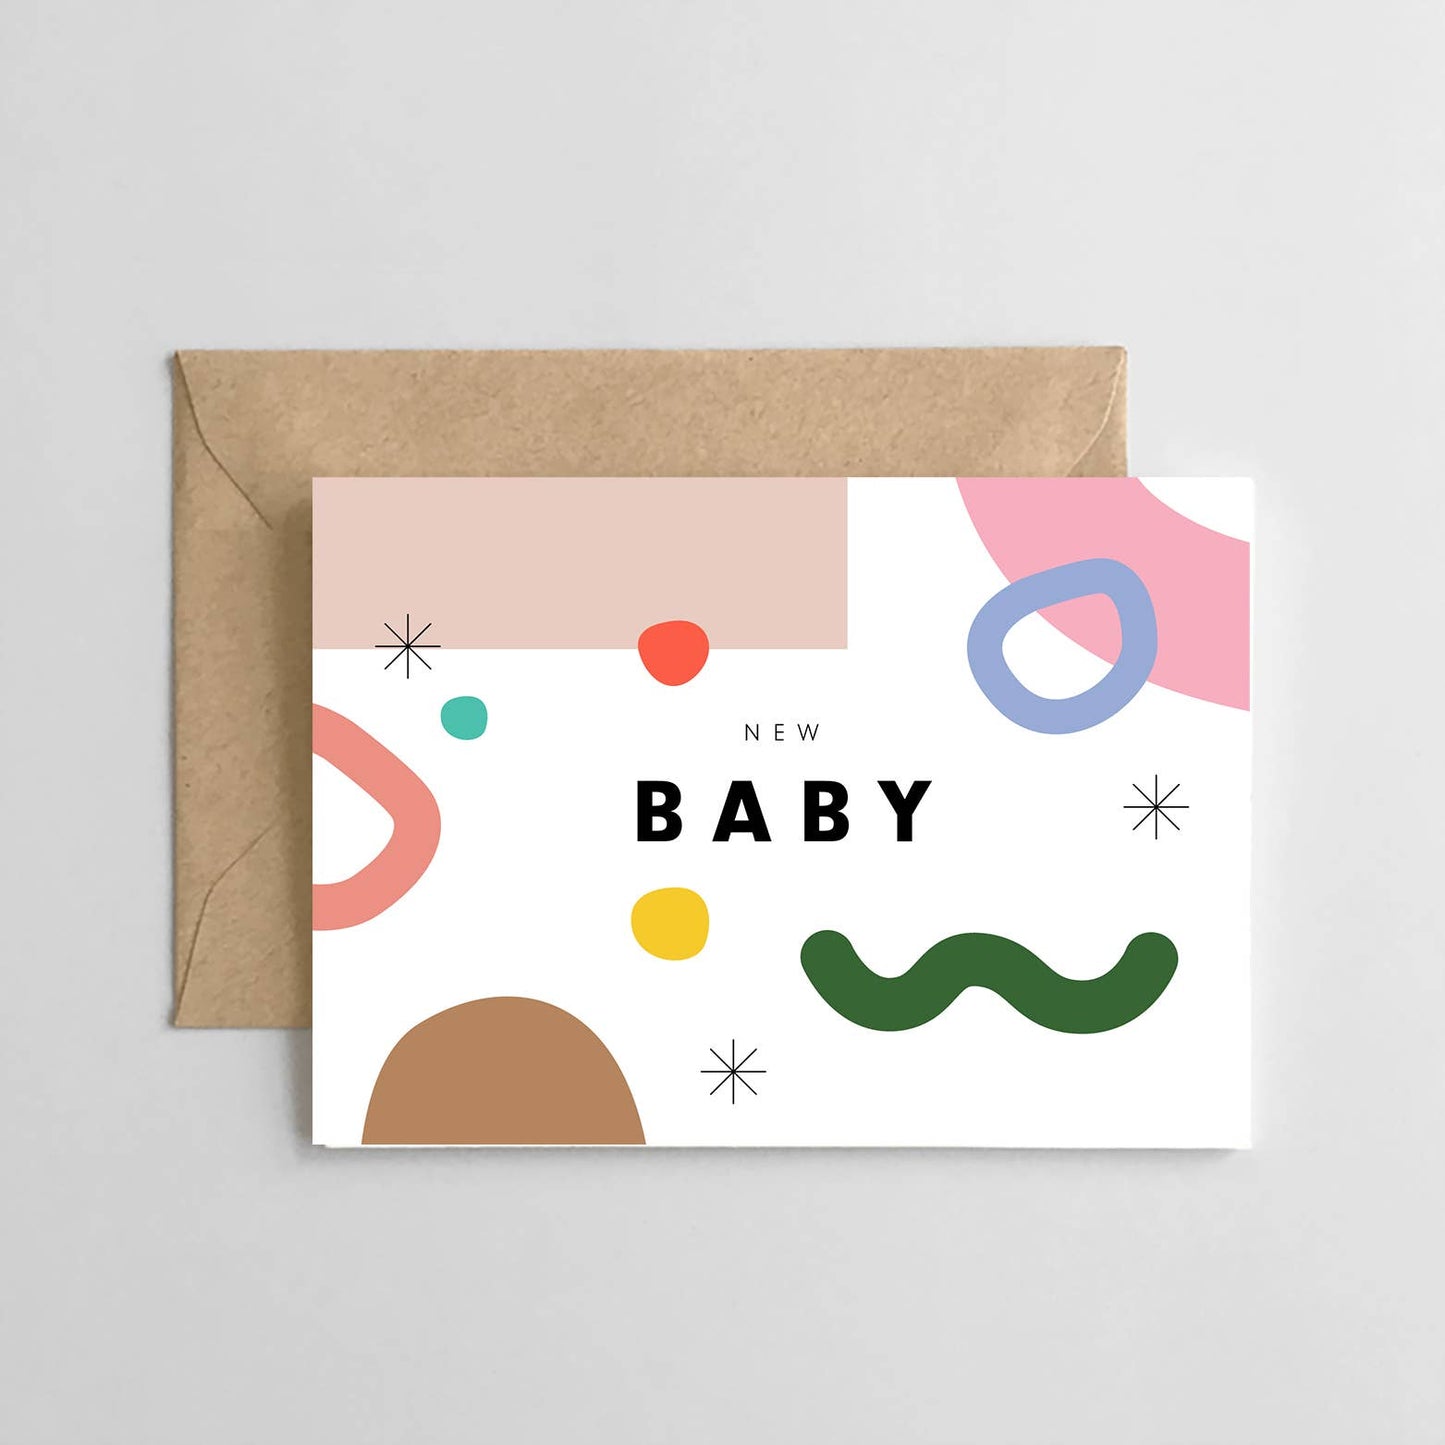 New Baby Abstract Card - The Crowd Went Wild